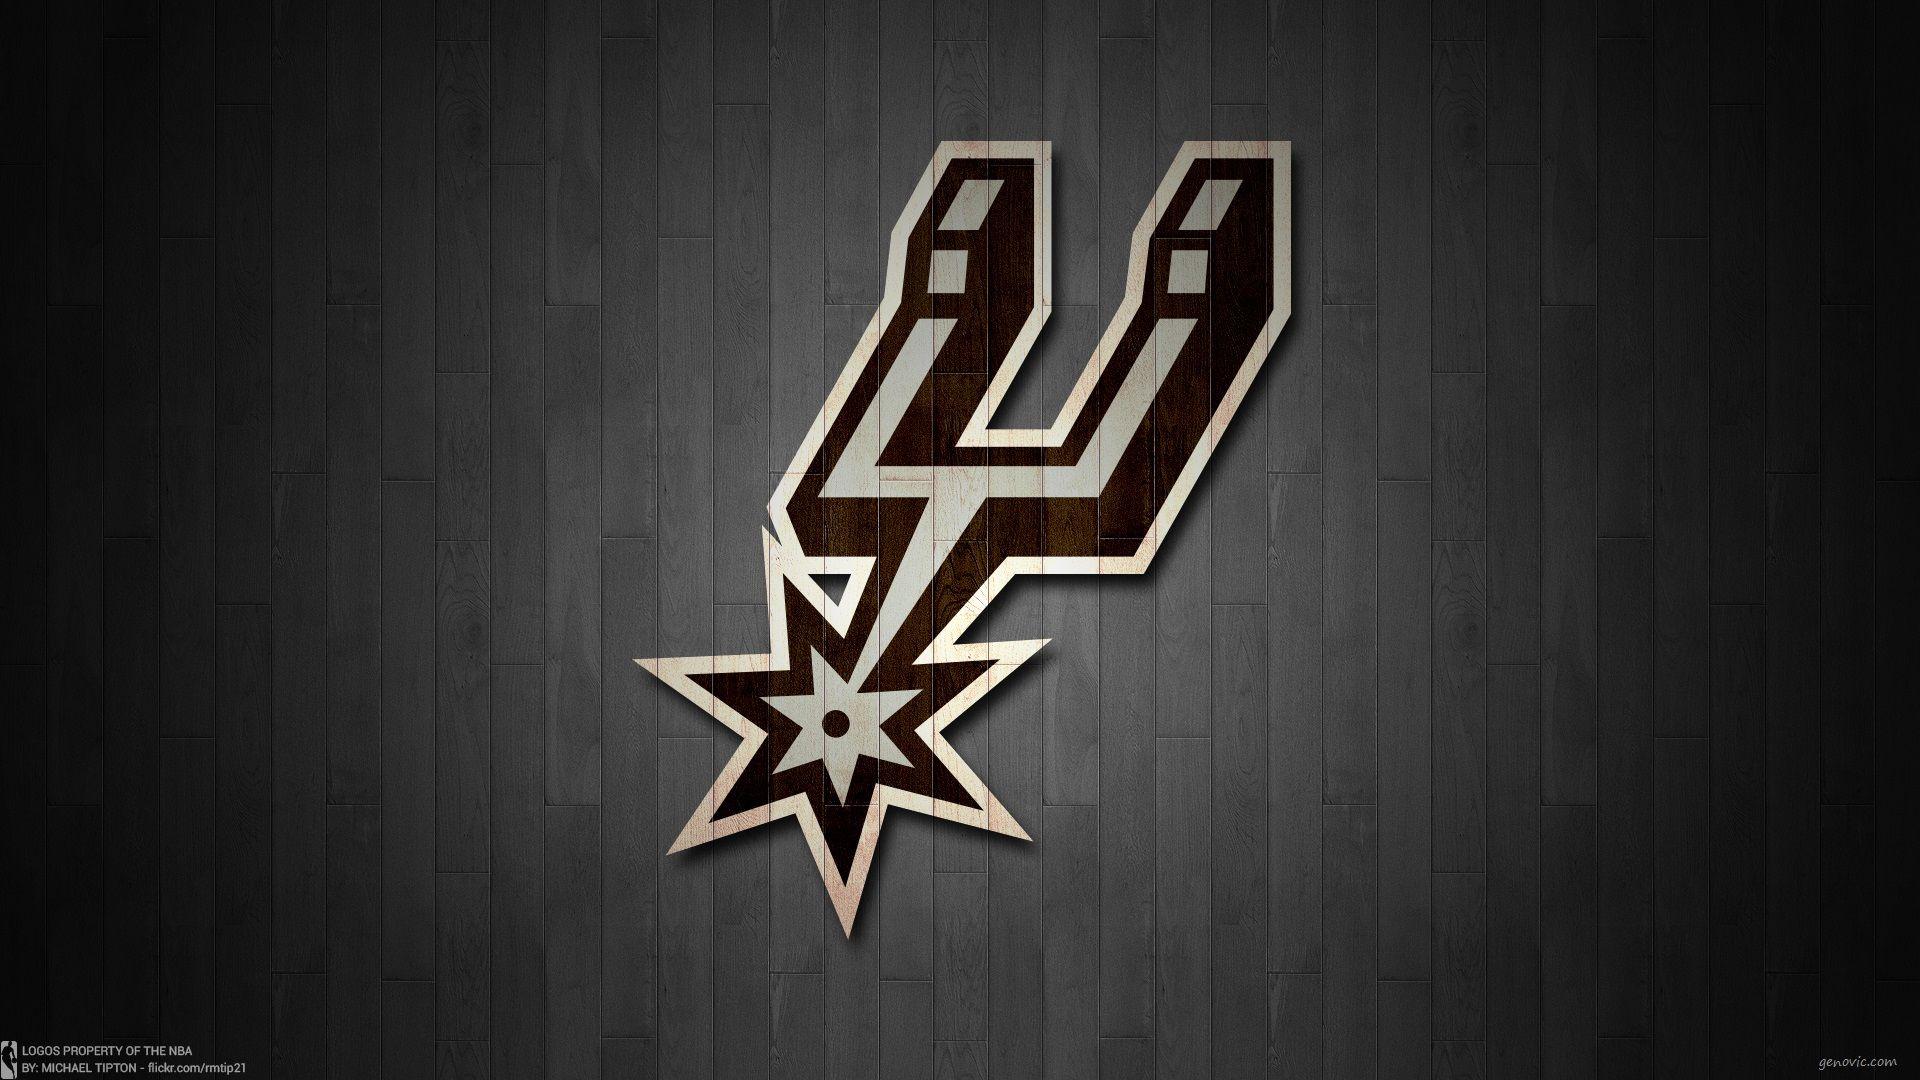 San Antonio Spurs Wallpaper High Resolution and Quality Download